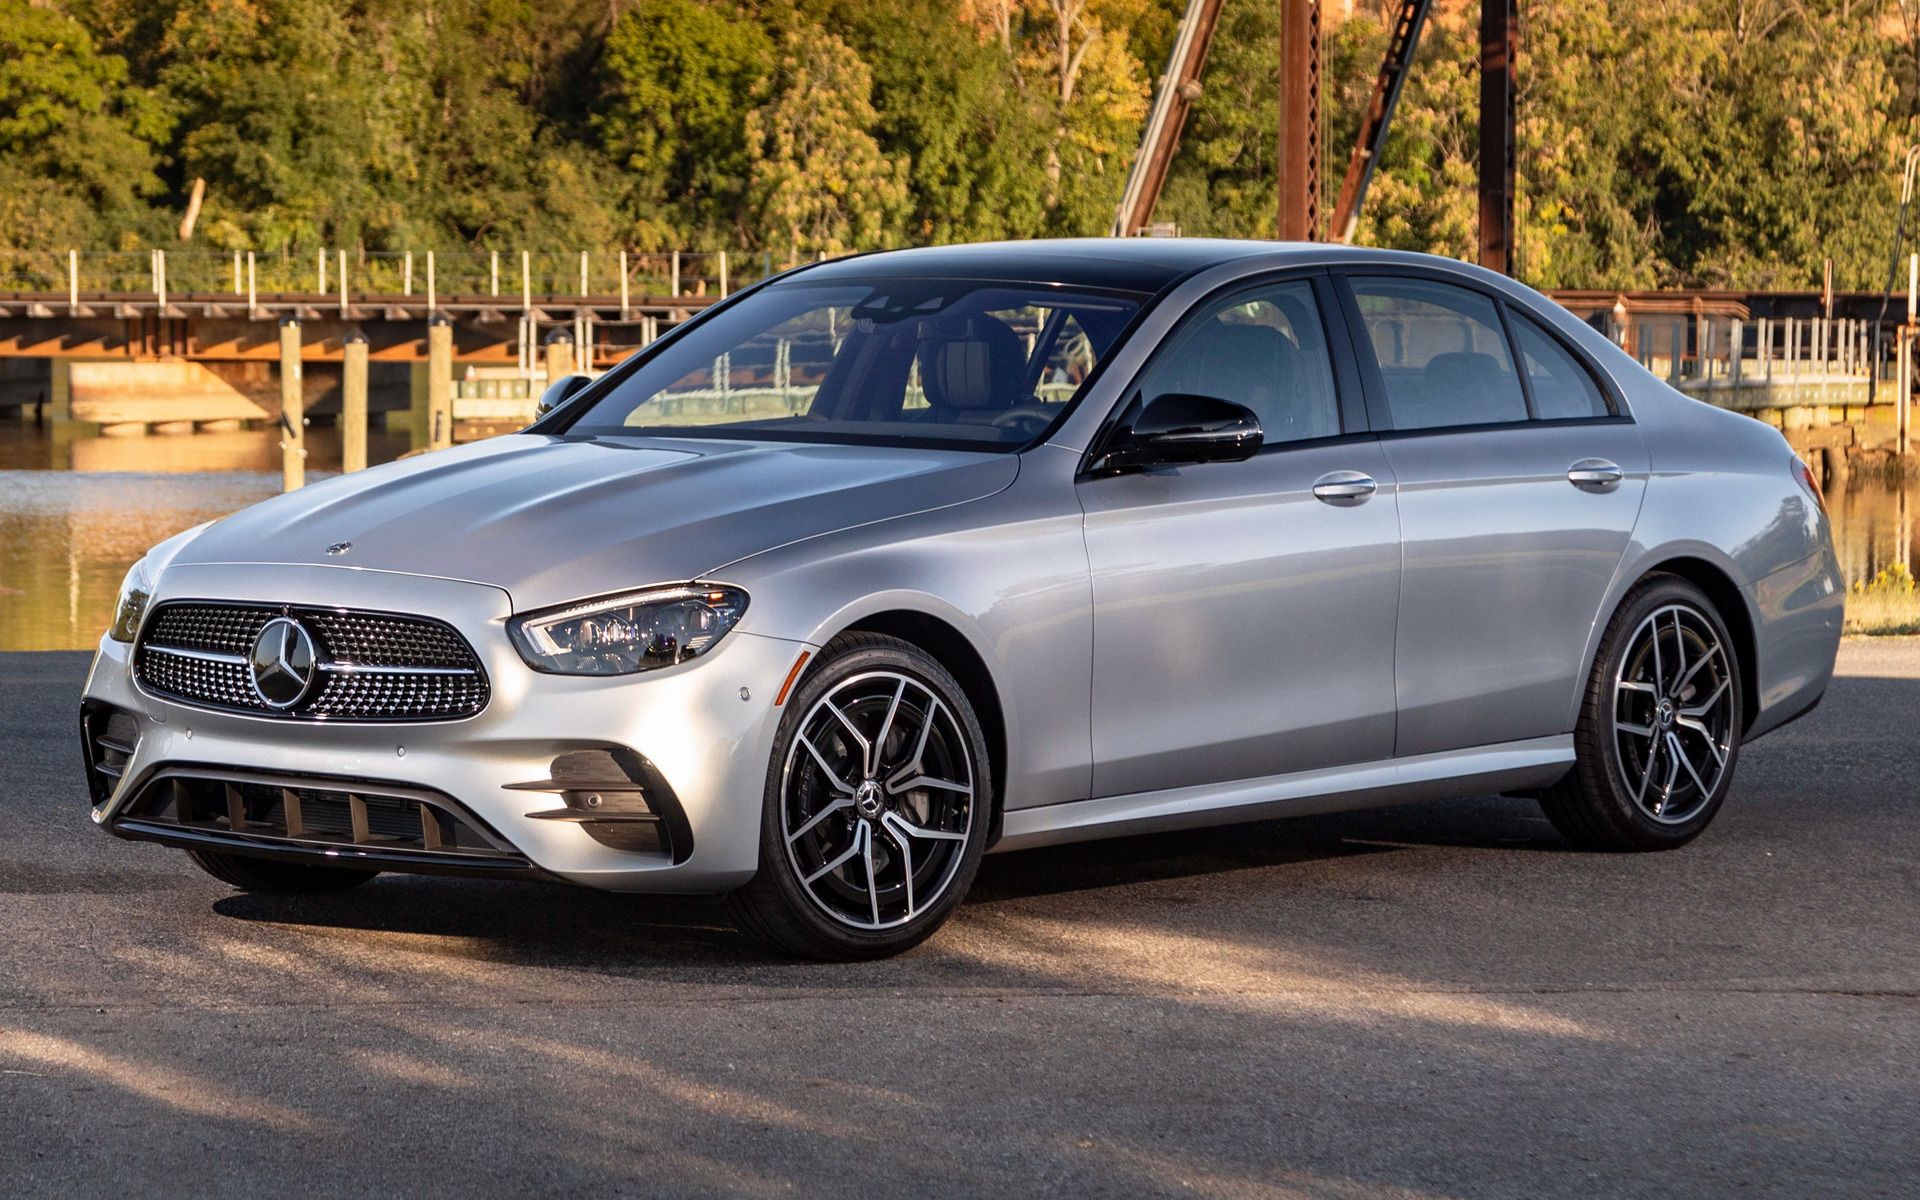 Mercedes Benz E Class AMG Styling (US) And HD Image